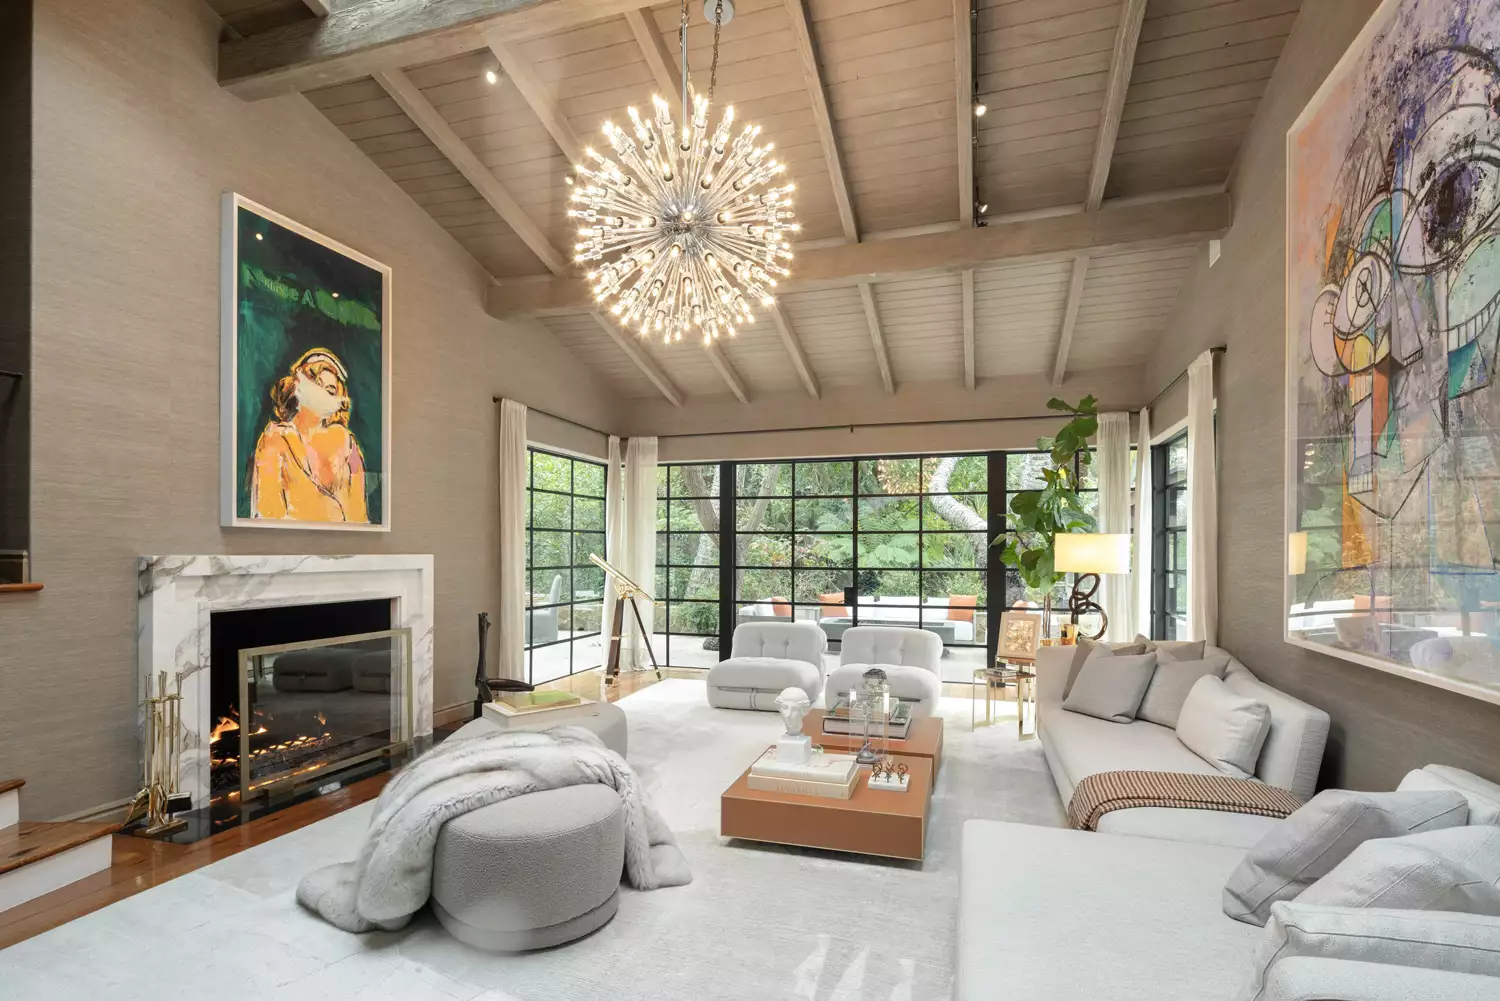 Jennifer Lopez Lists Her 'Iconic' L.A. Home in Bel Air for $42.5M